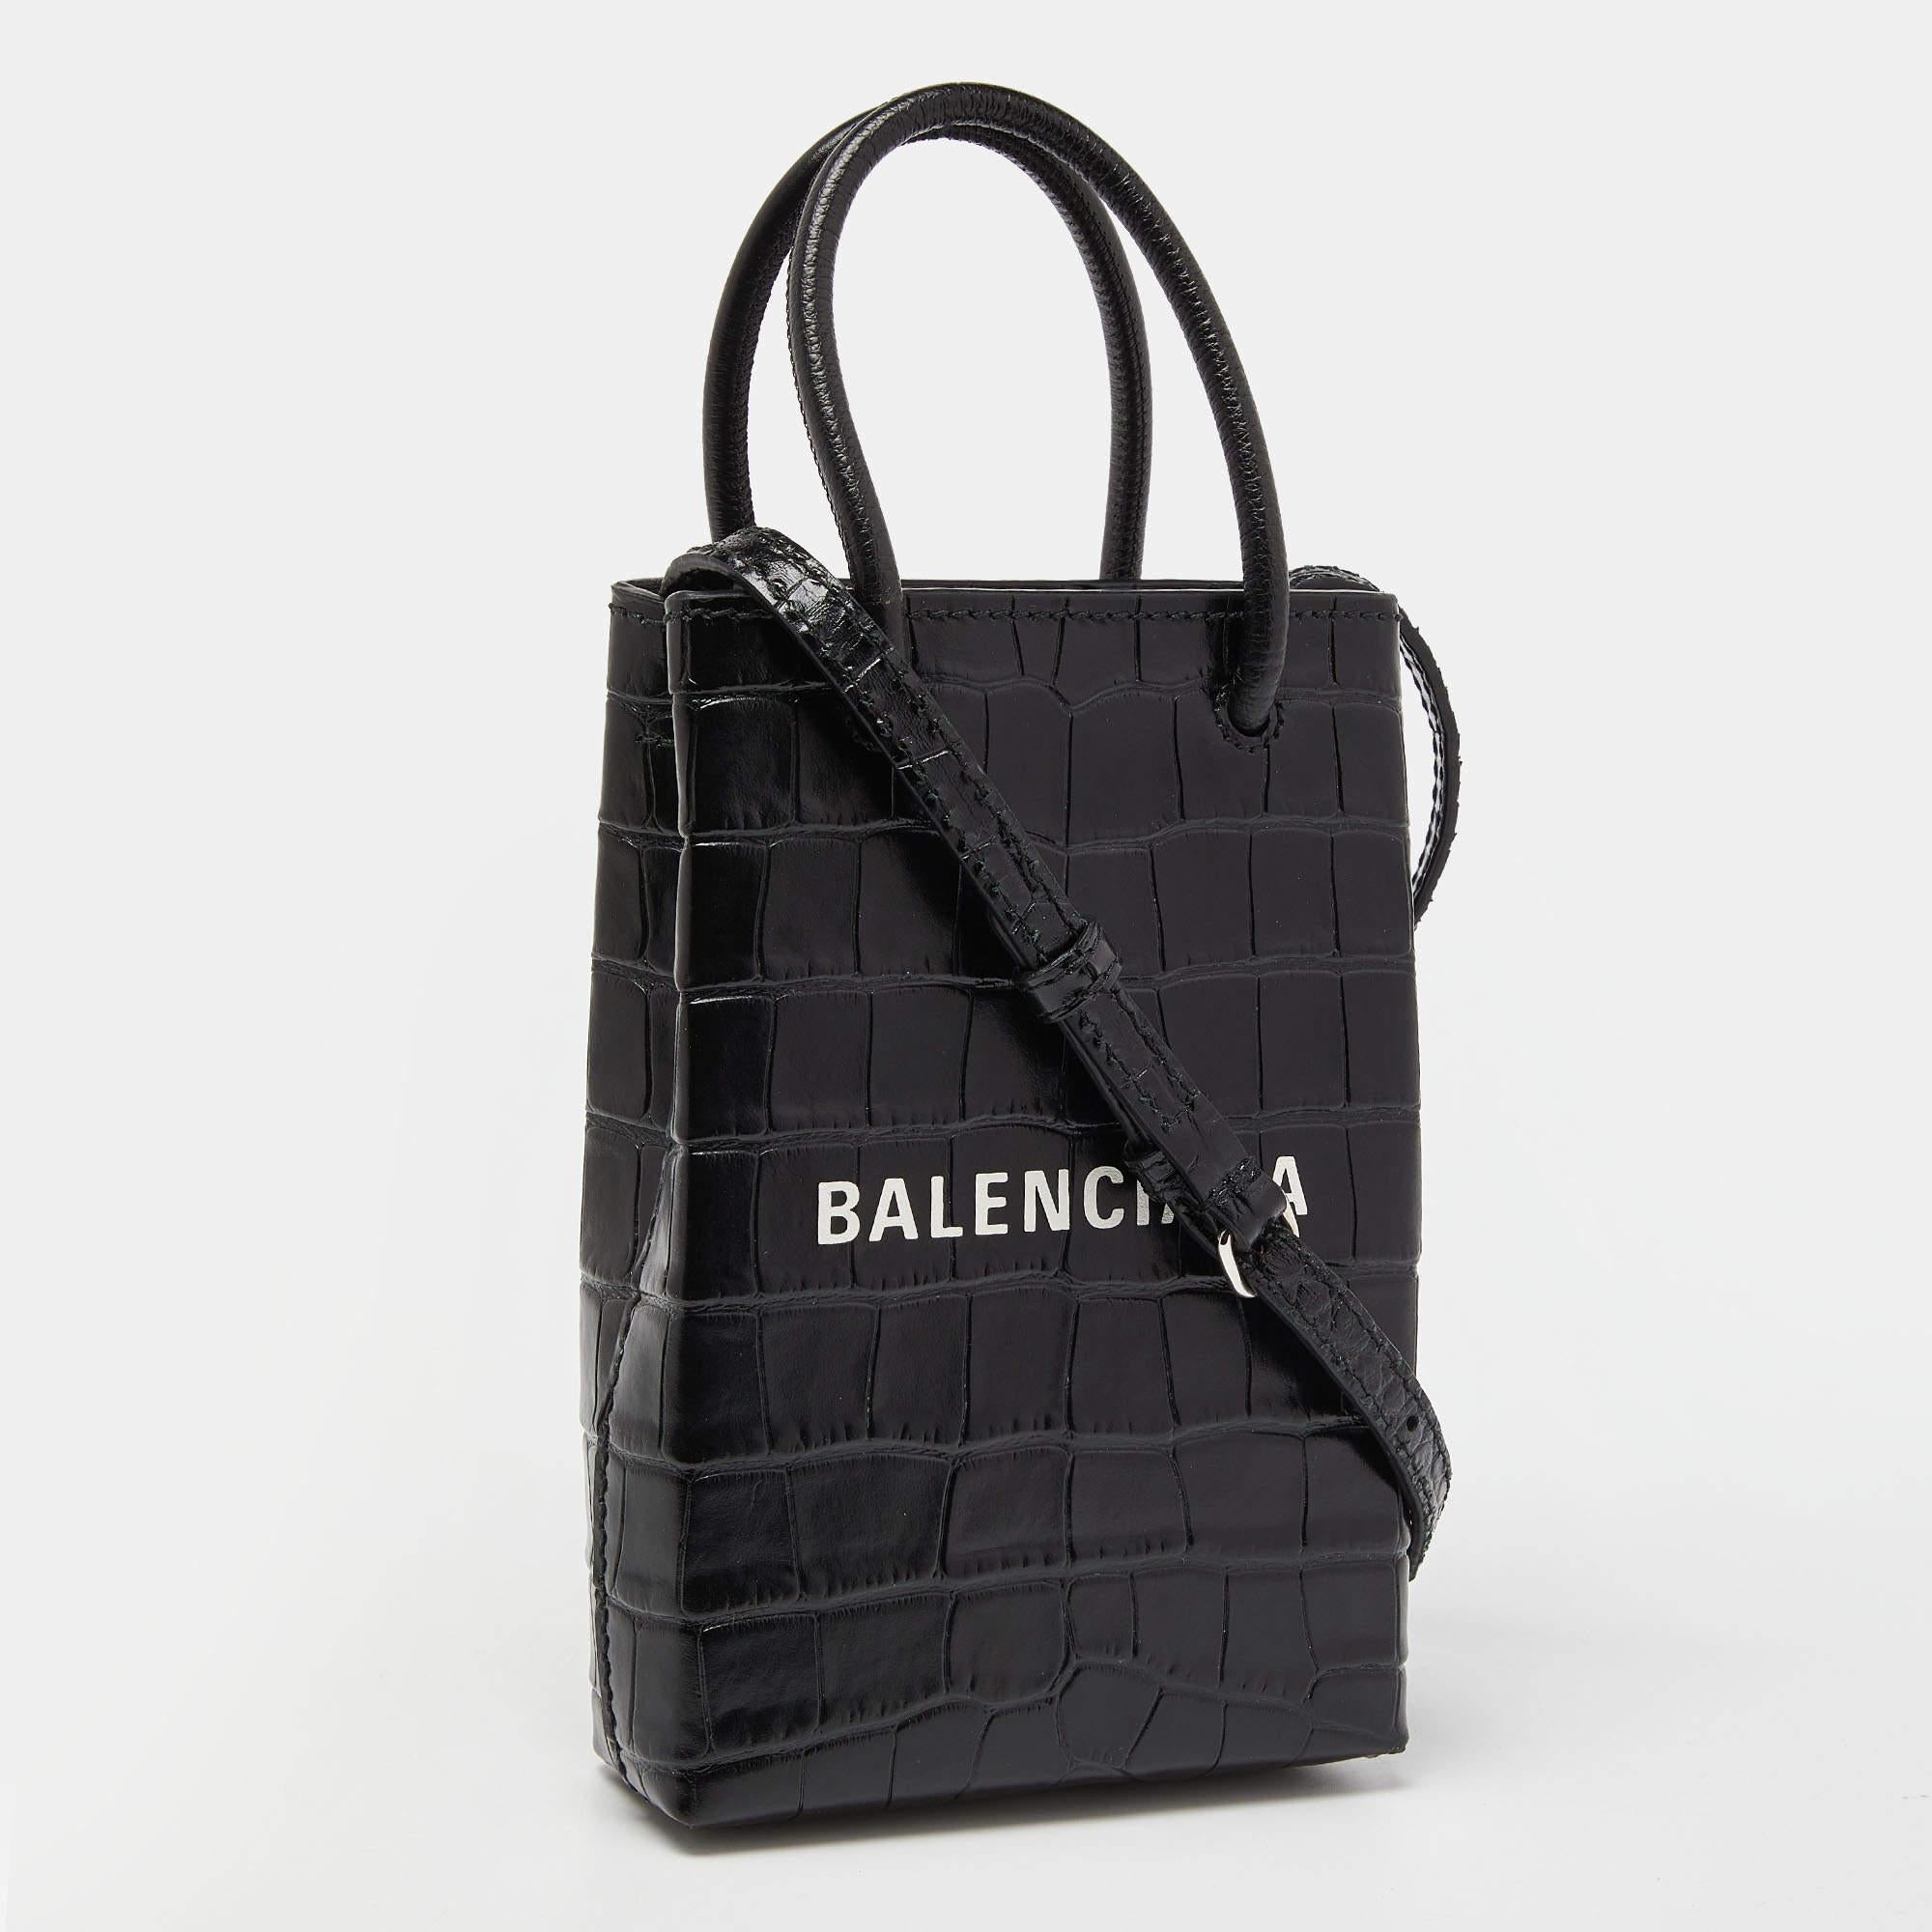 The Balenciaga crossbody bag is a luxurious accessory. Crafted from high-quality black crocodile-embossed leather, it features a sleek, compact design with a phone pocket, card slots, and a detachable crossbody strap for hands-free convenience. It